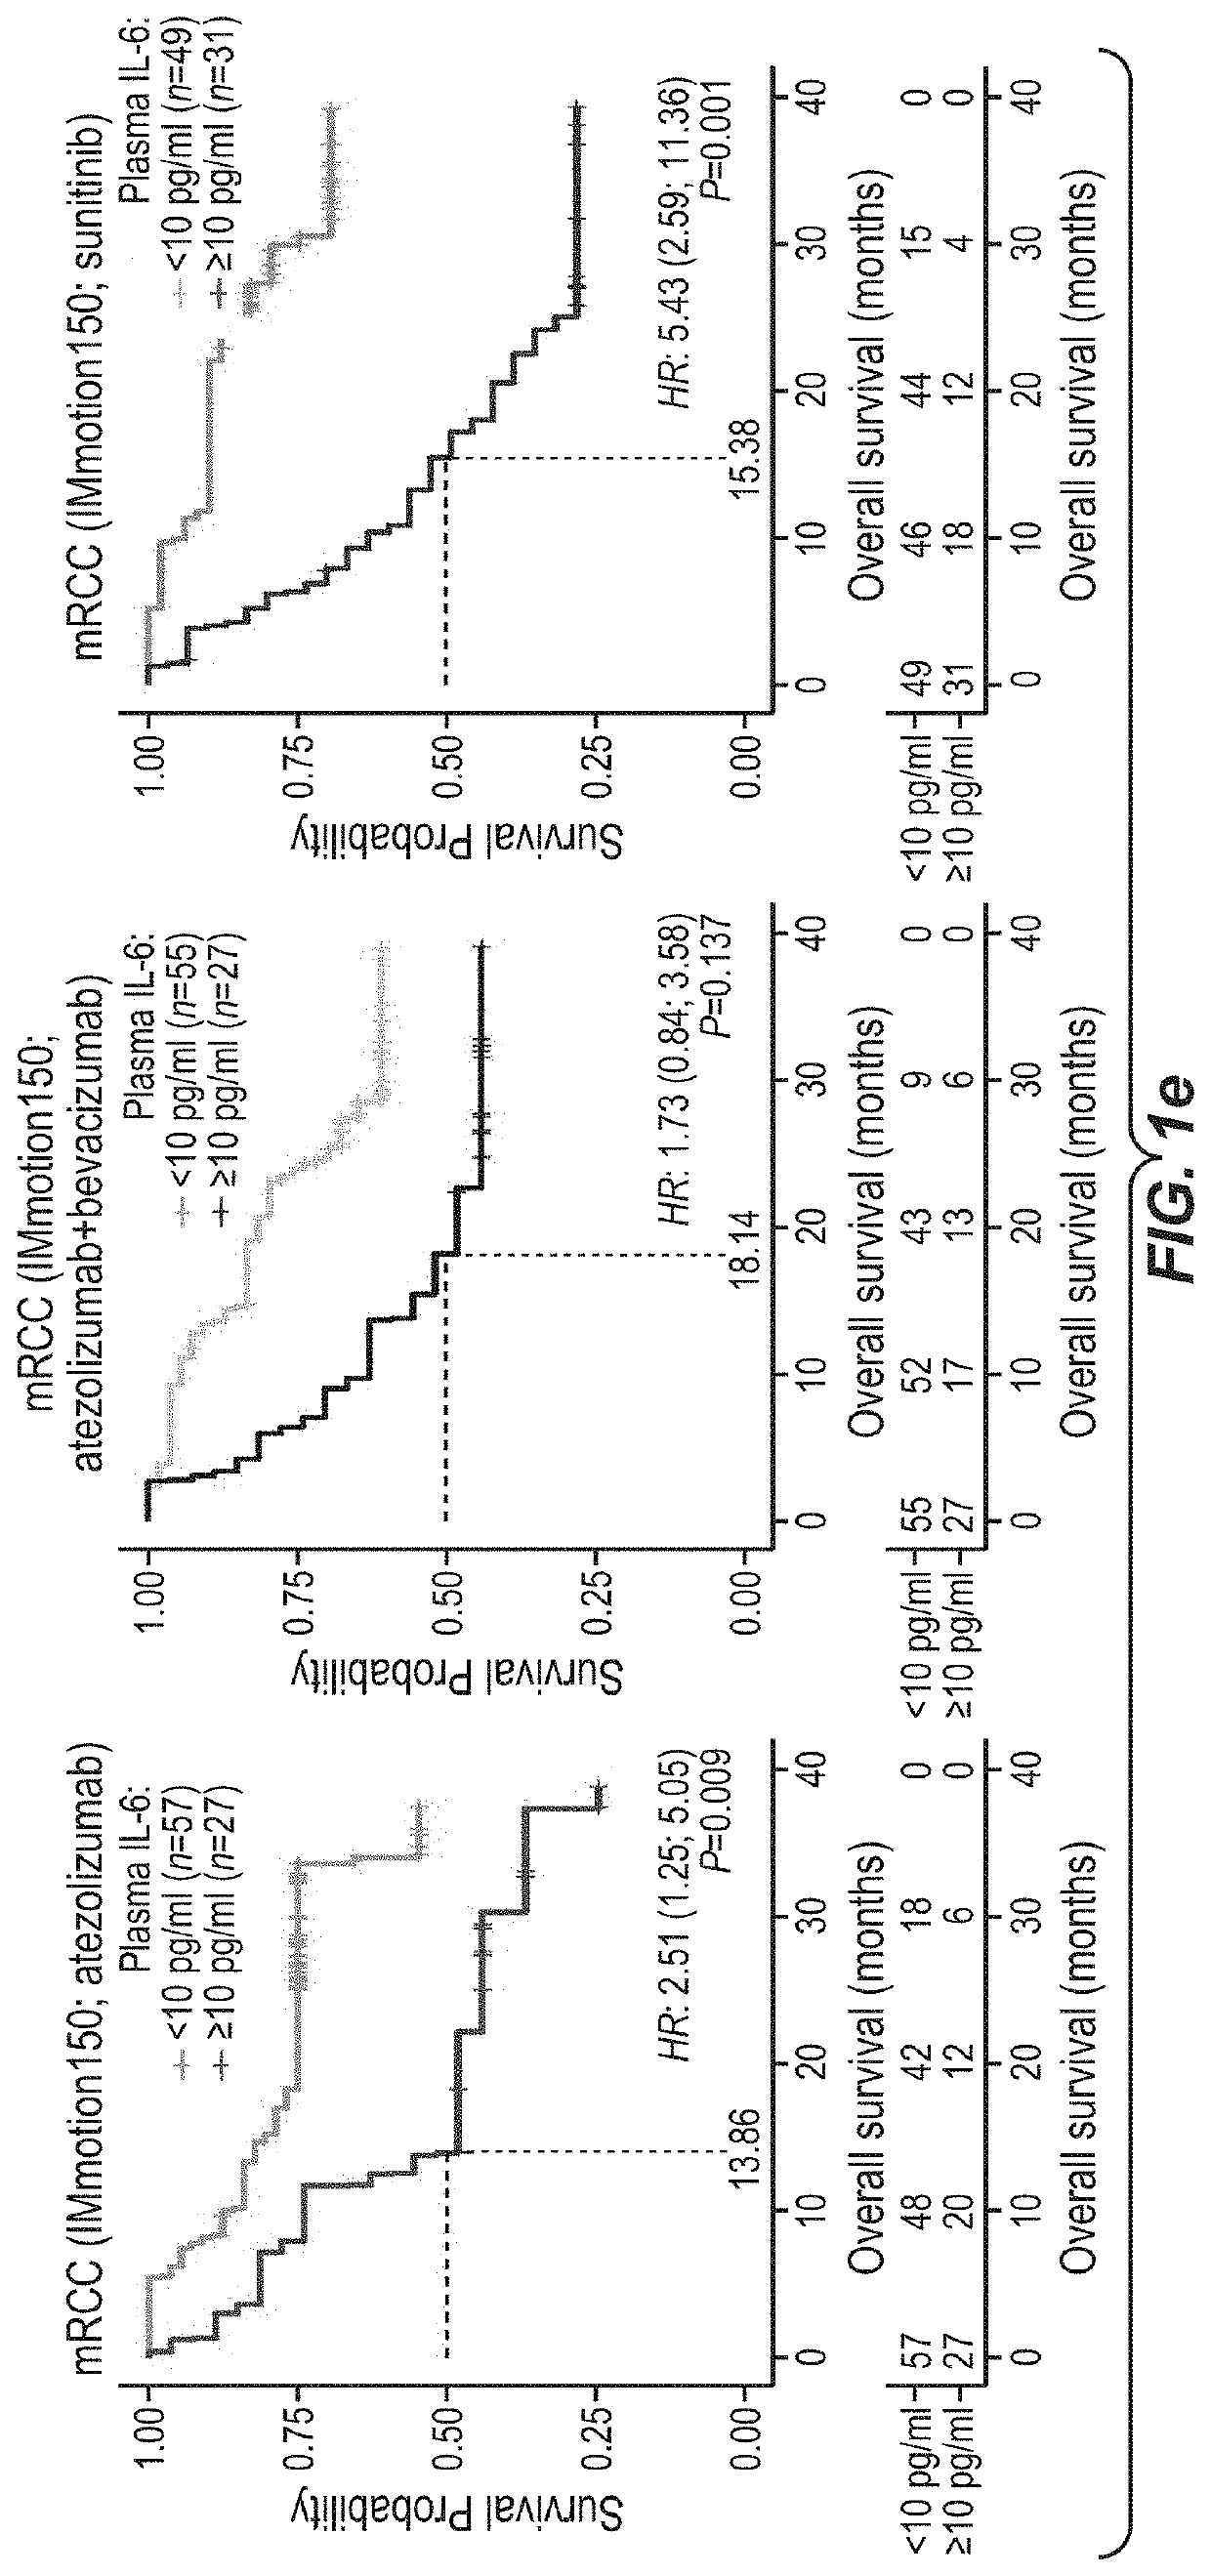 Combination therapy for cancer comprising pd-1 axis binding antagonist and il6 antagonist